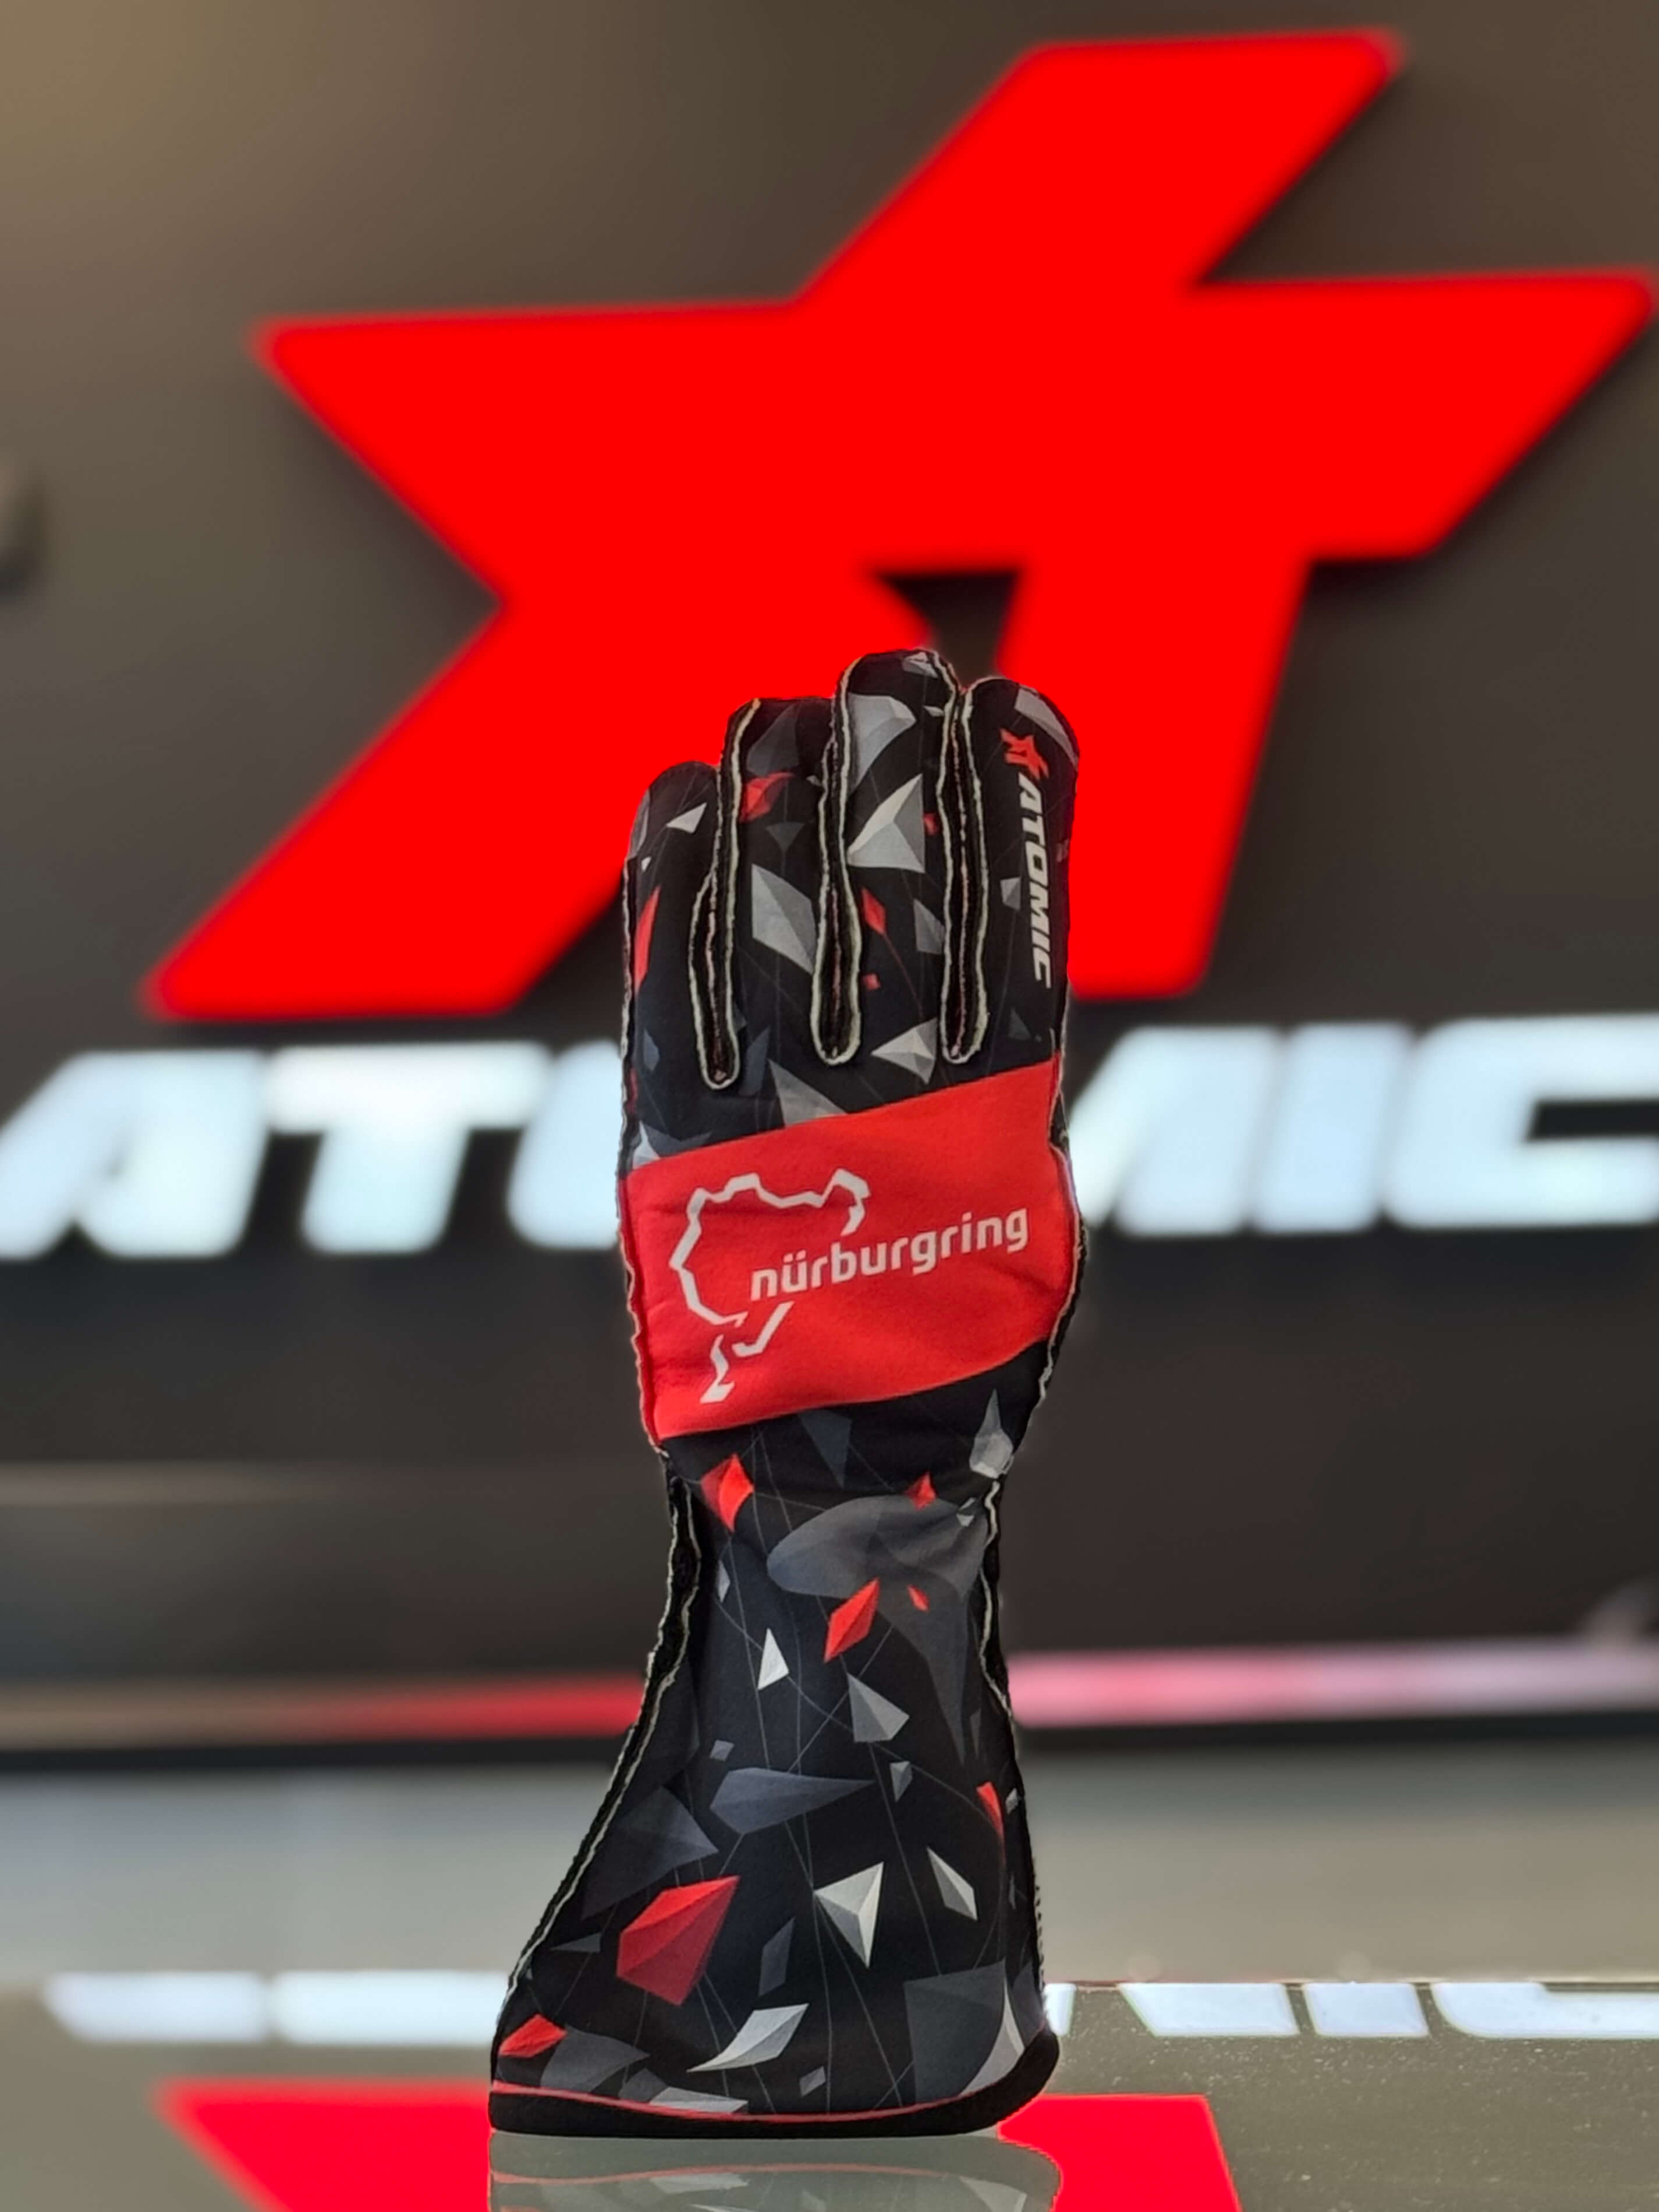 ARD R82-500-S Racing Gloves Atomic Nürburgring Edition FIA 8856-2018 Black/Red Size S (Officially Licensed Nürburgring Product) Photo-0 